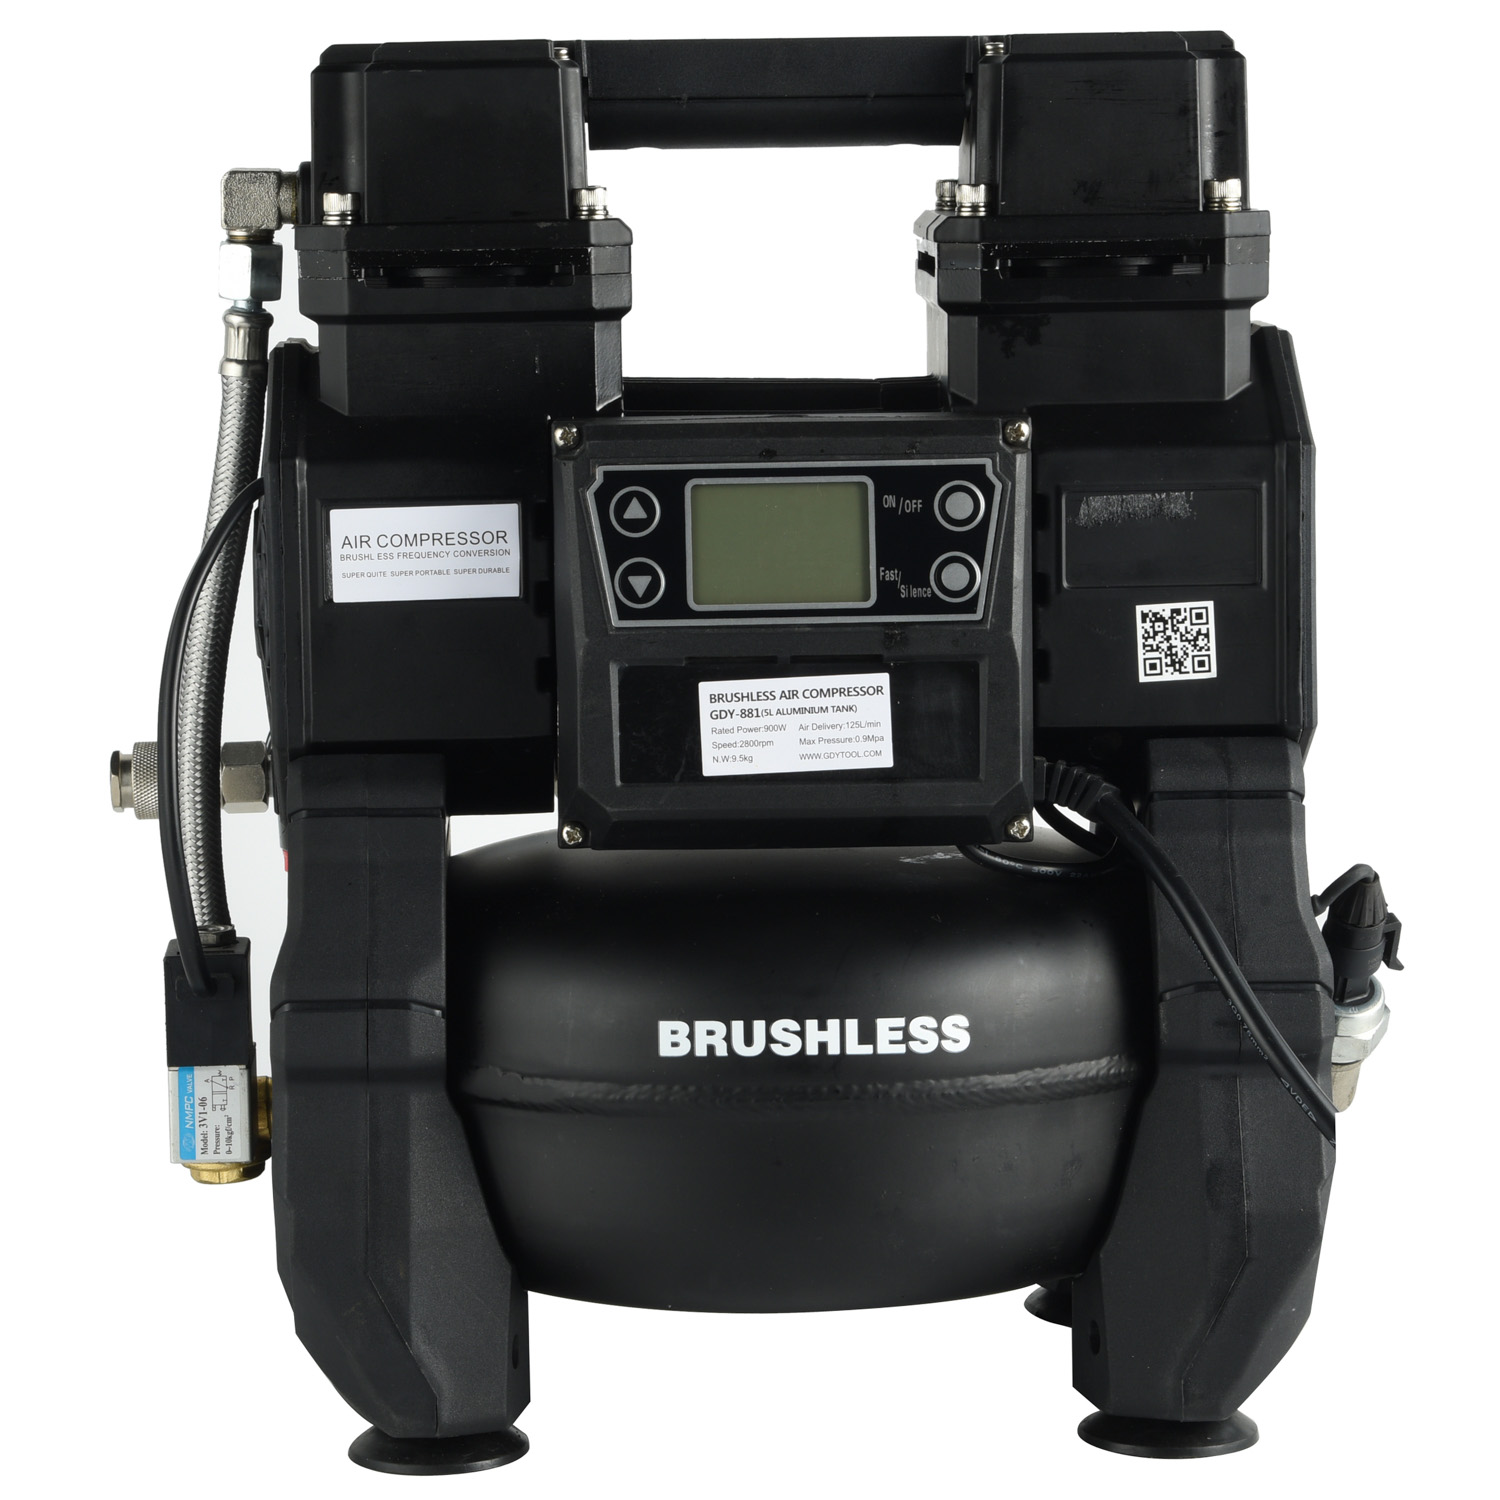 Brushless Air compressor GDY-881